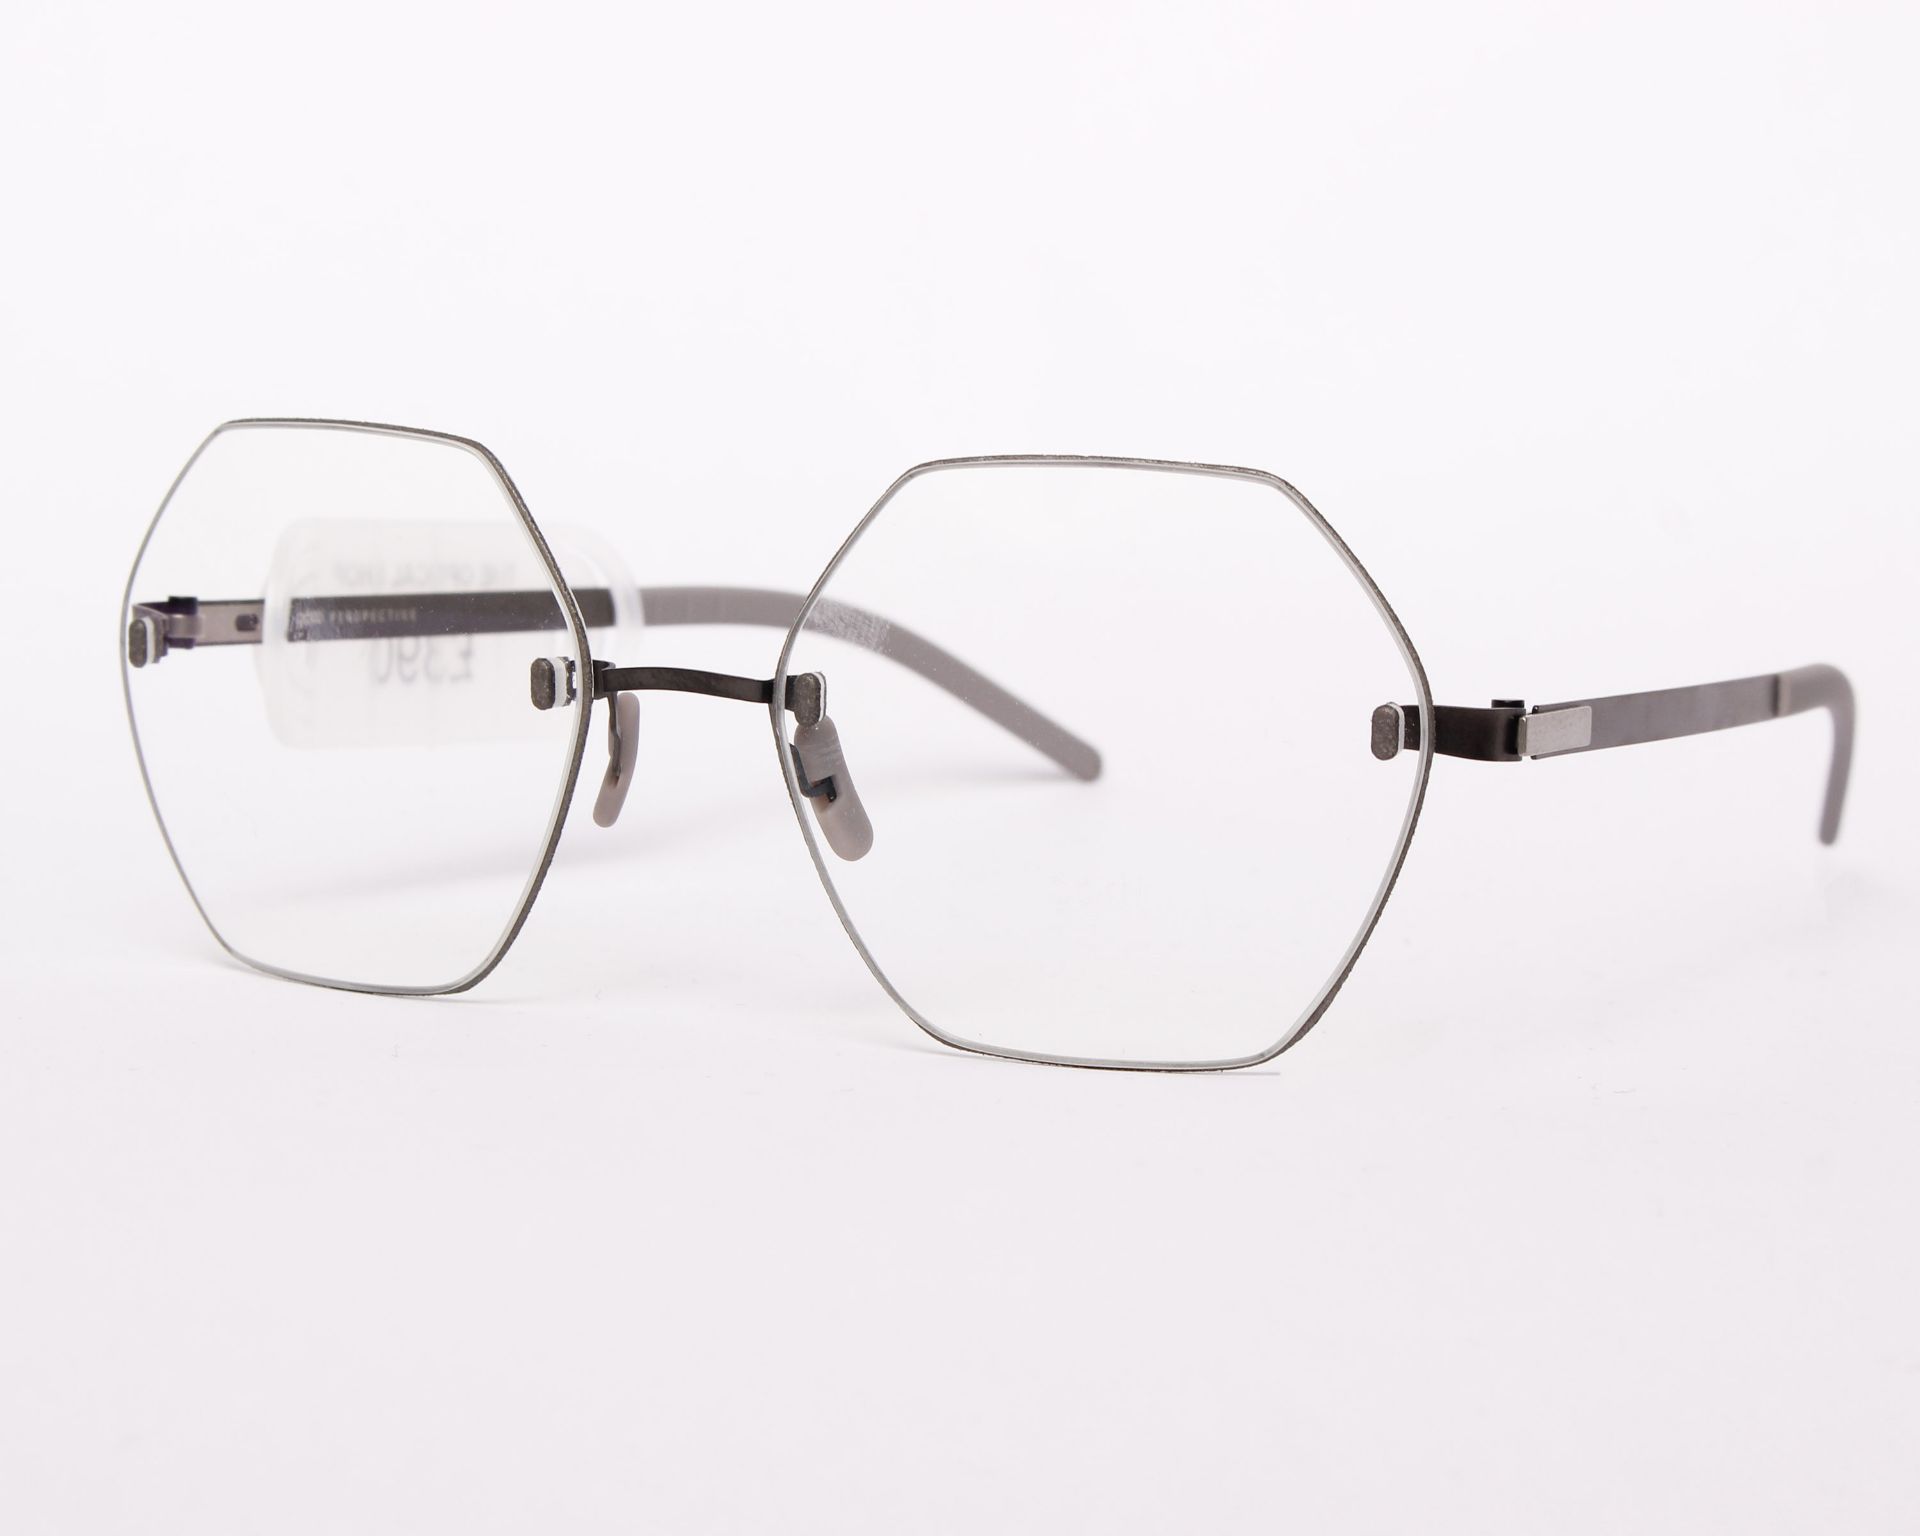 A pair of as new Gotti Perspective glasses frames with clear glass (RRP £390).